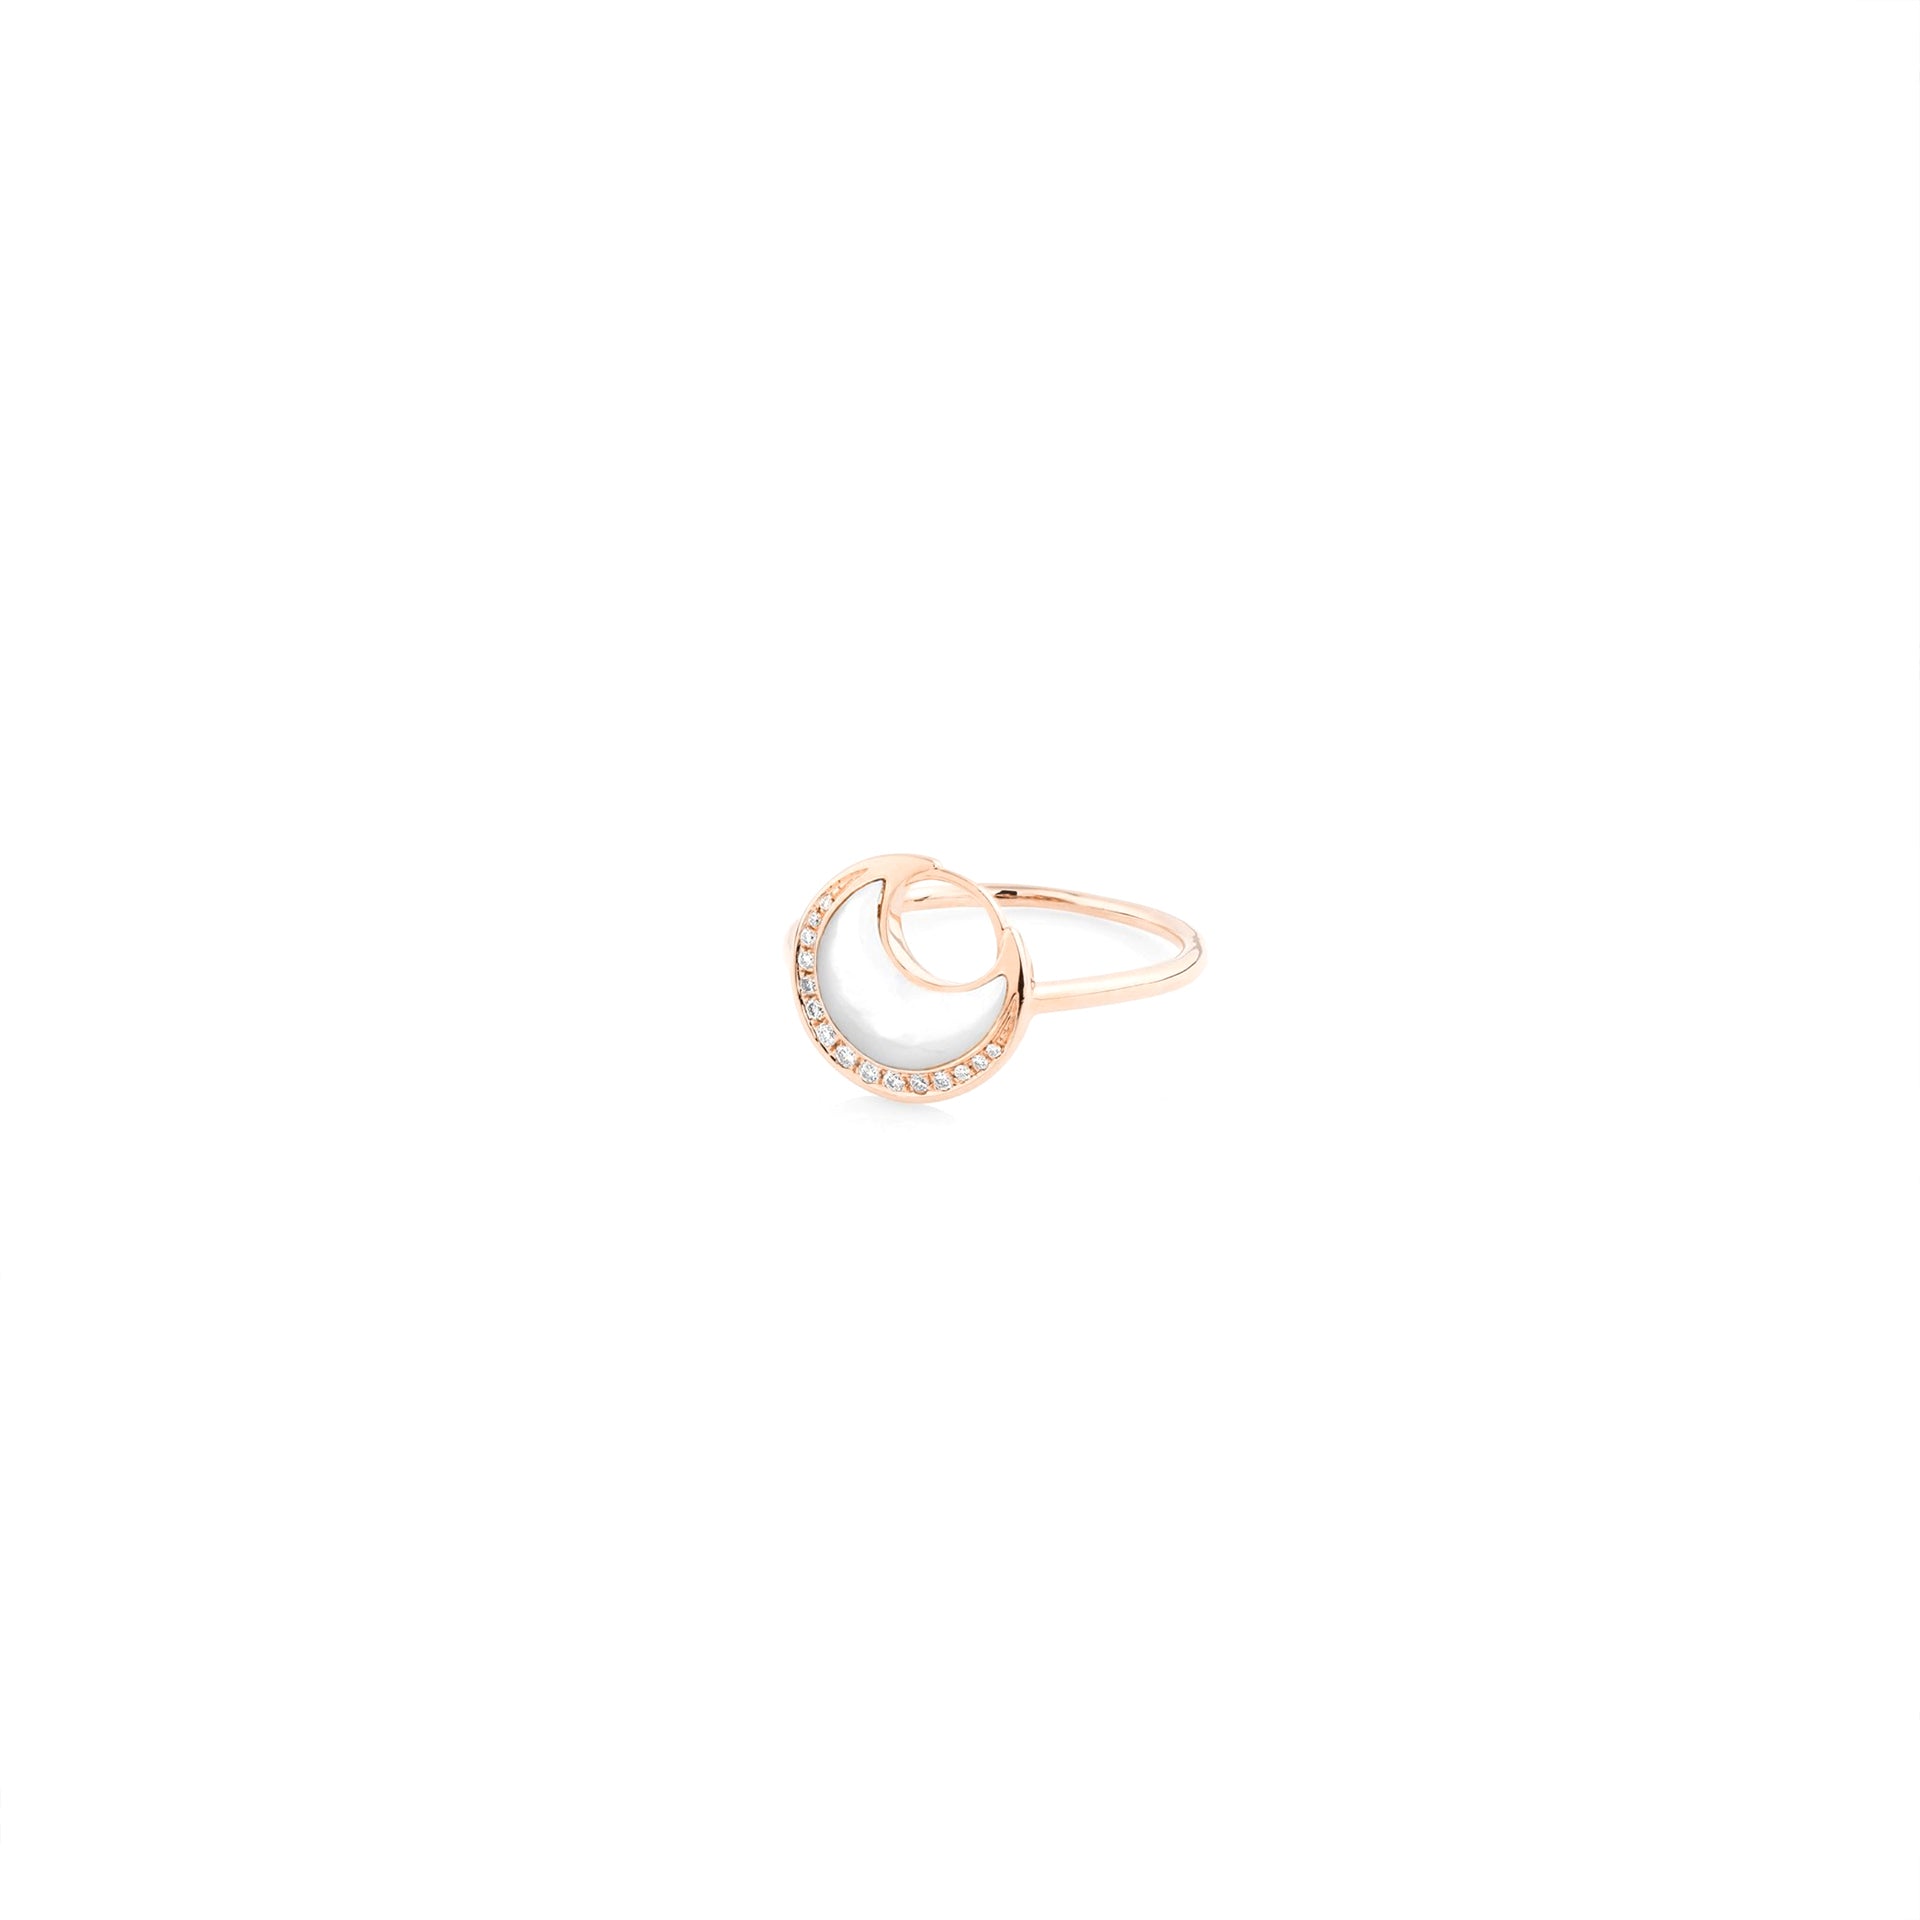 Al Hilal ring in rose gold with mother of pearl stone and diamonds